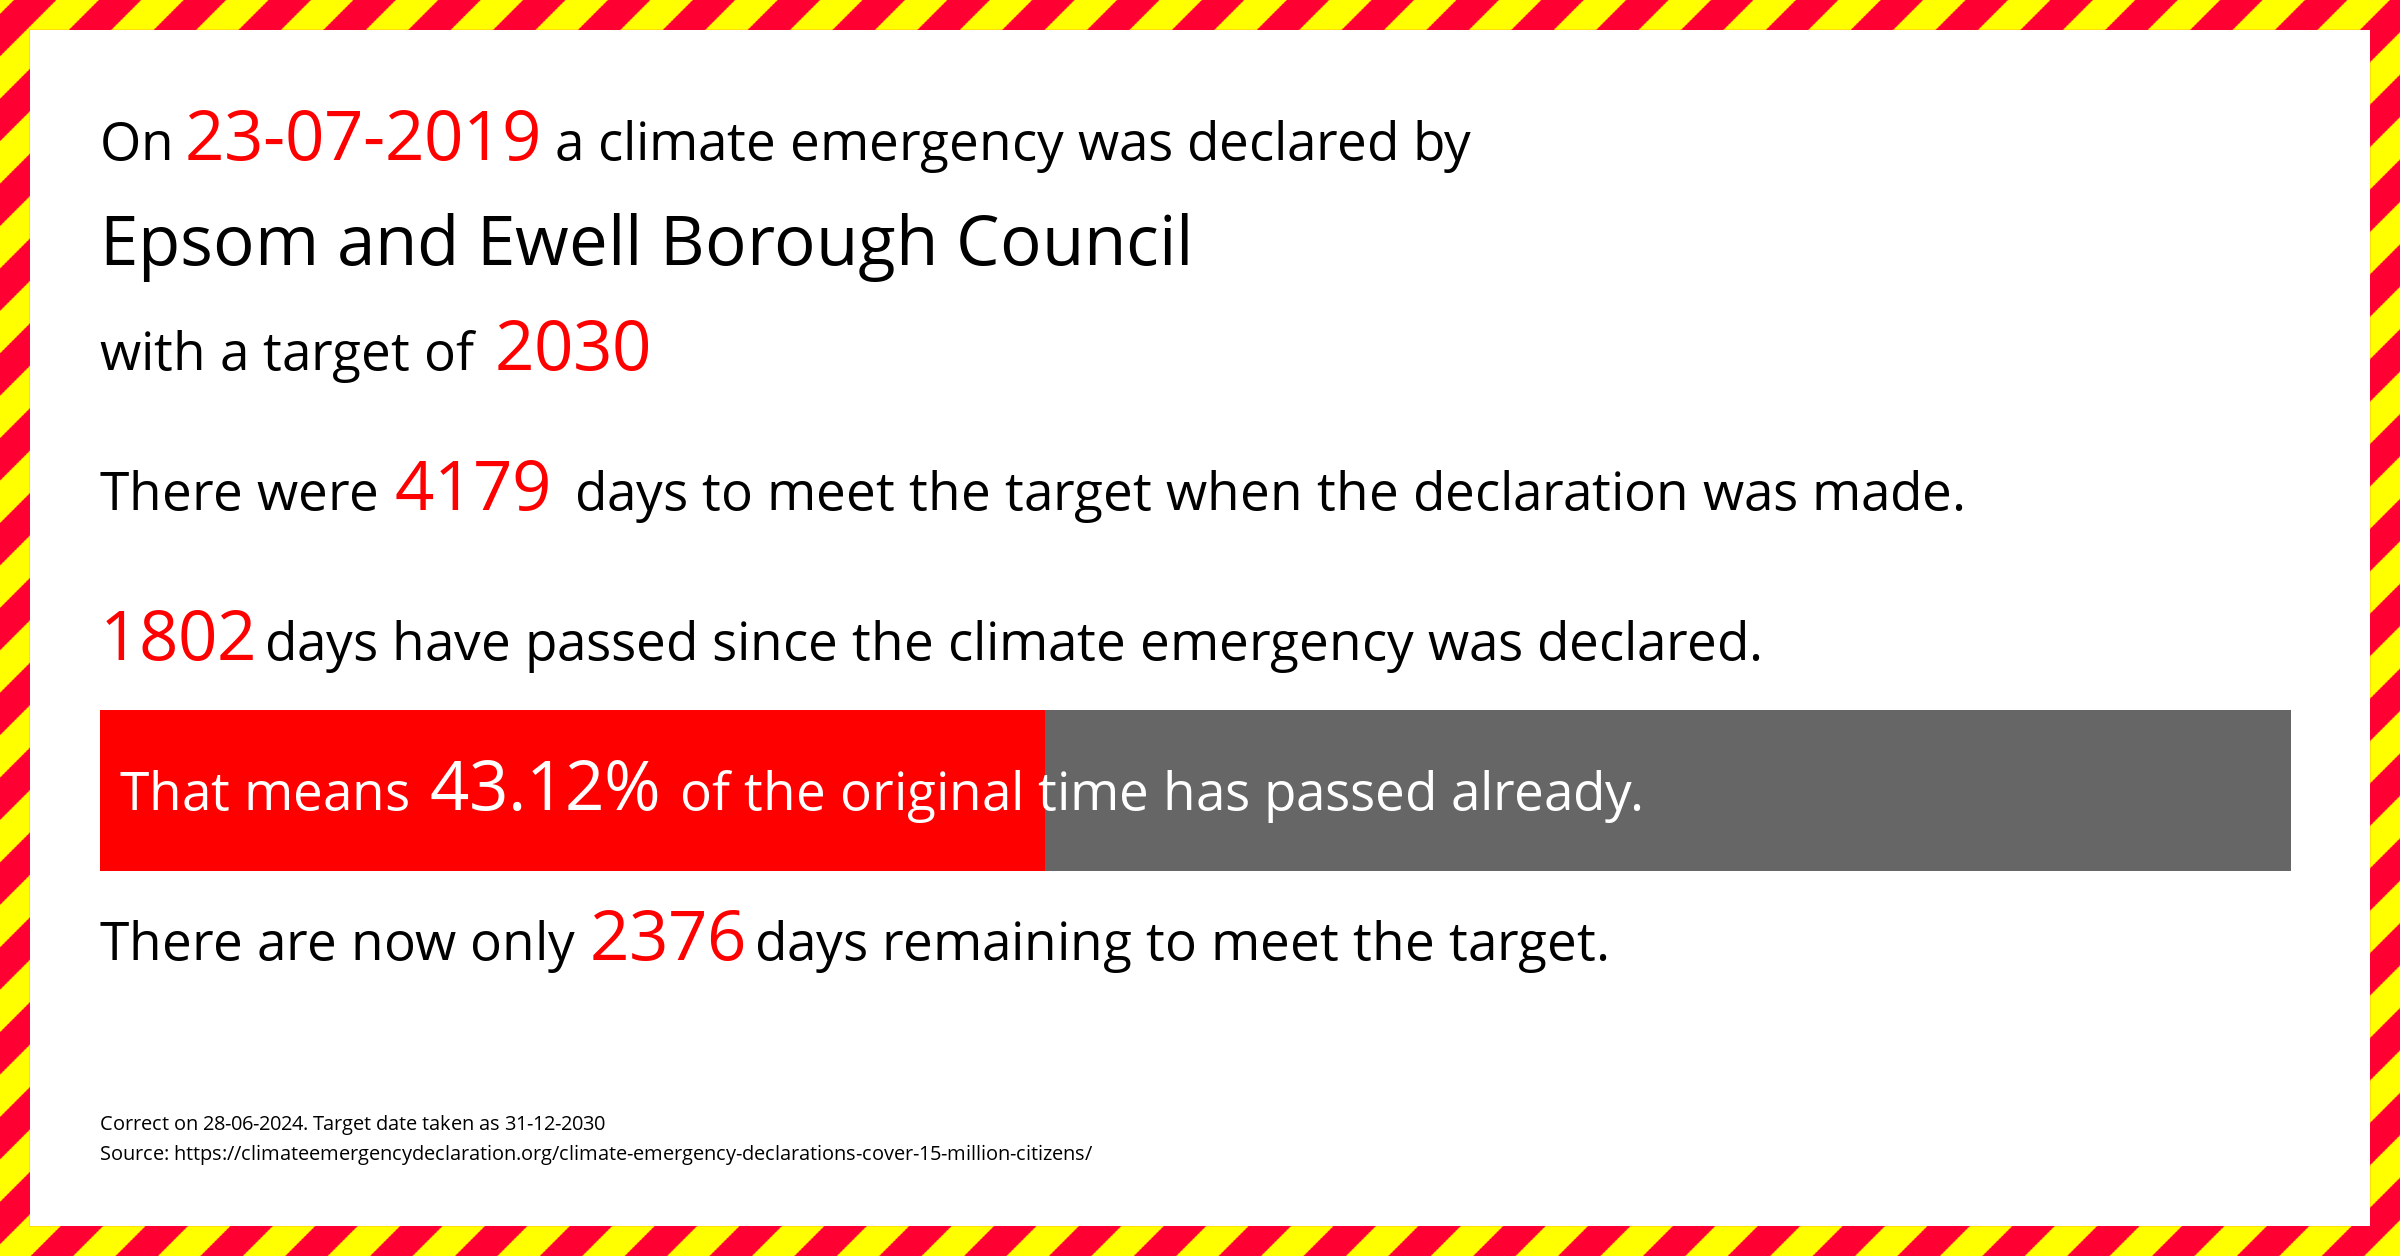 Epsom and Ewell Borough Council declared a Climate emergency on Tuesday 23rd July 2019, with a target of 2030.